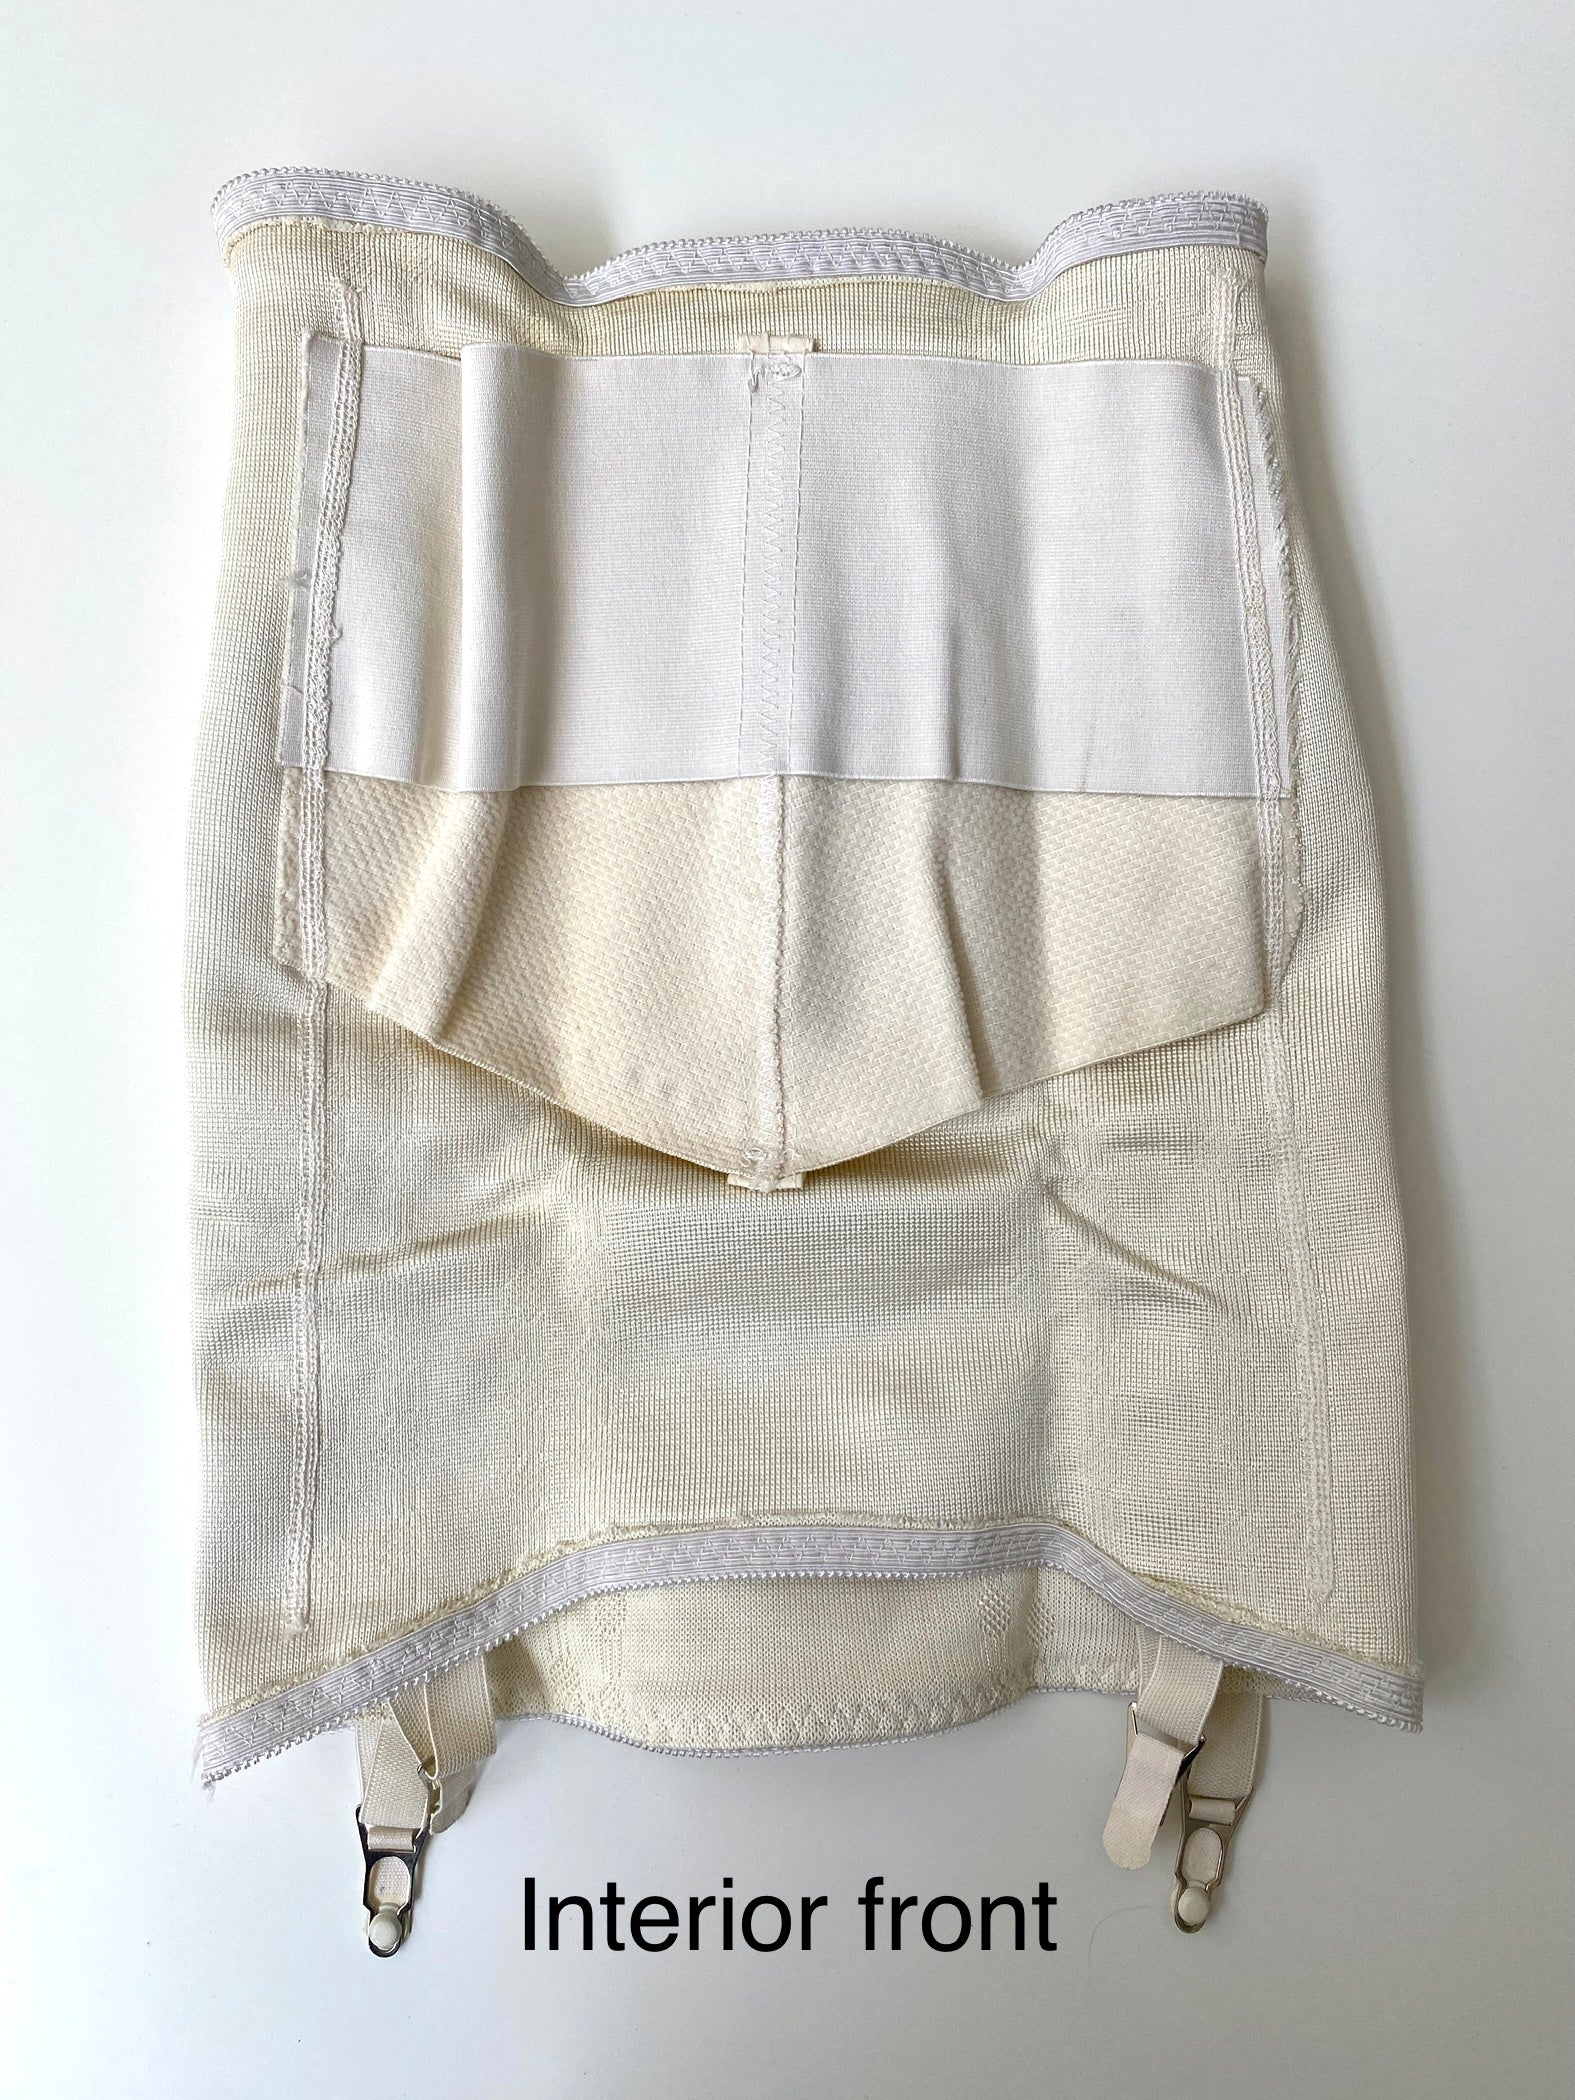 Vintage 1950's-60's ADOLA Brand Cream Ivory Girdle With Garters Size M -  clothing & accessories - by owner - apparel